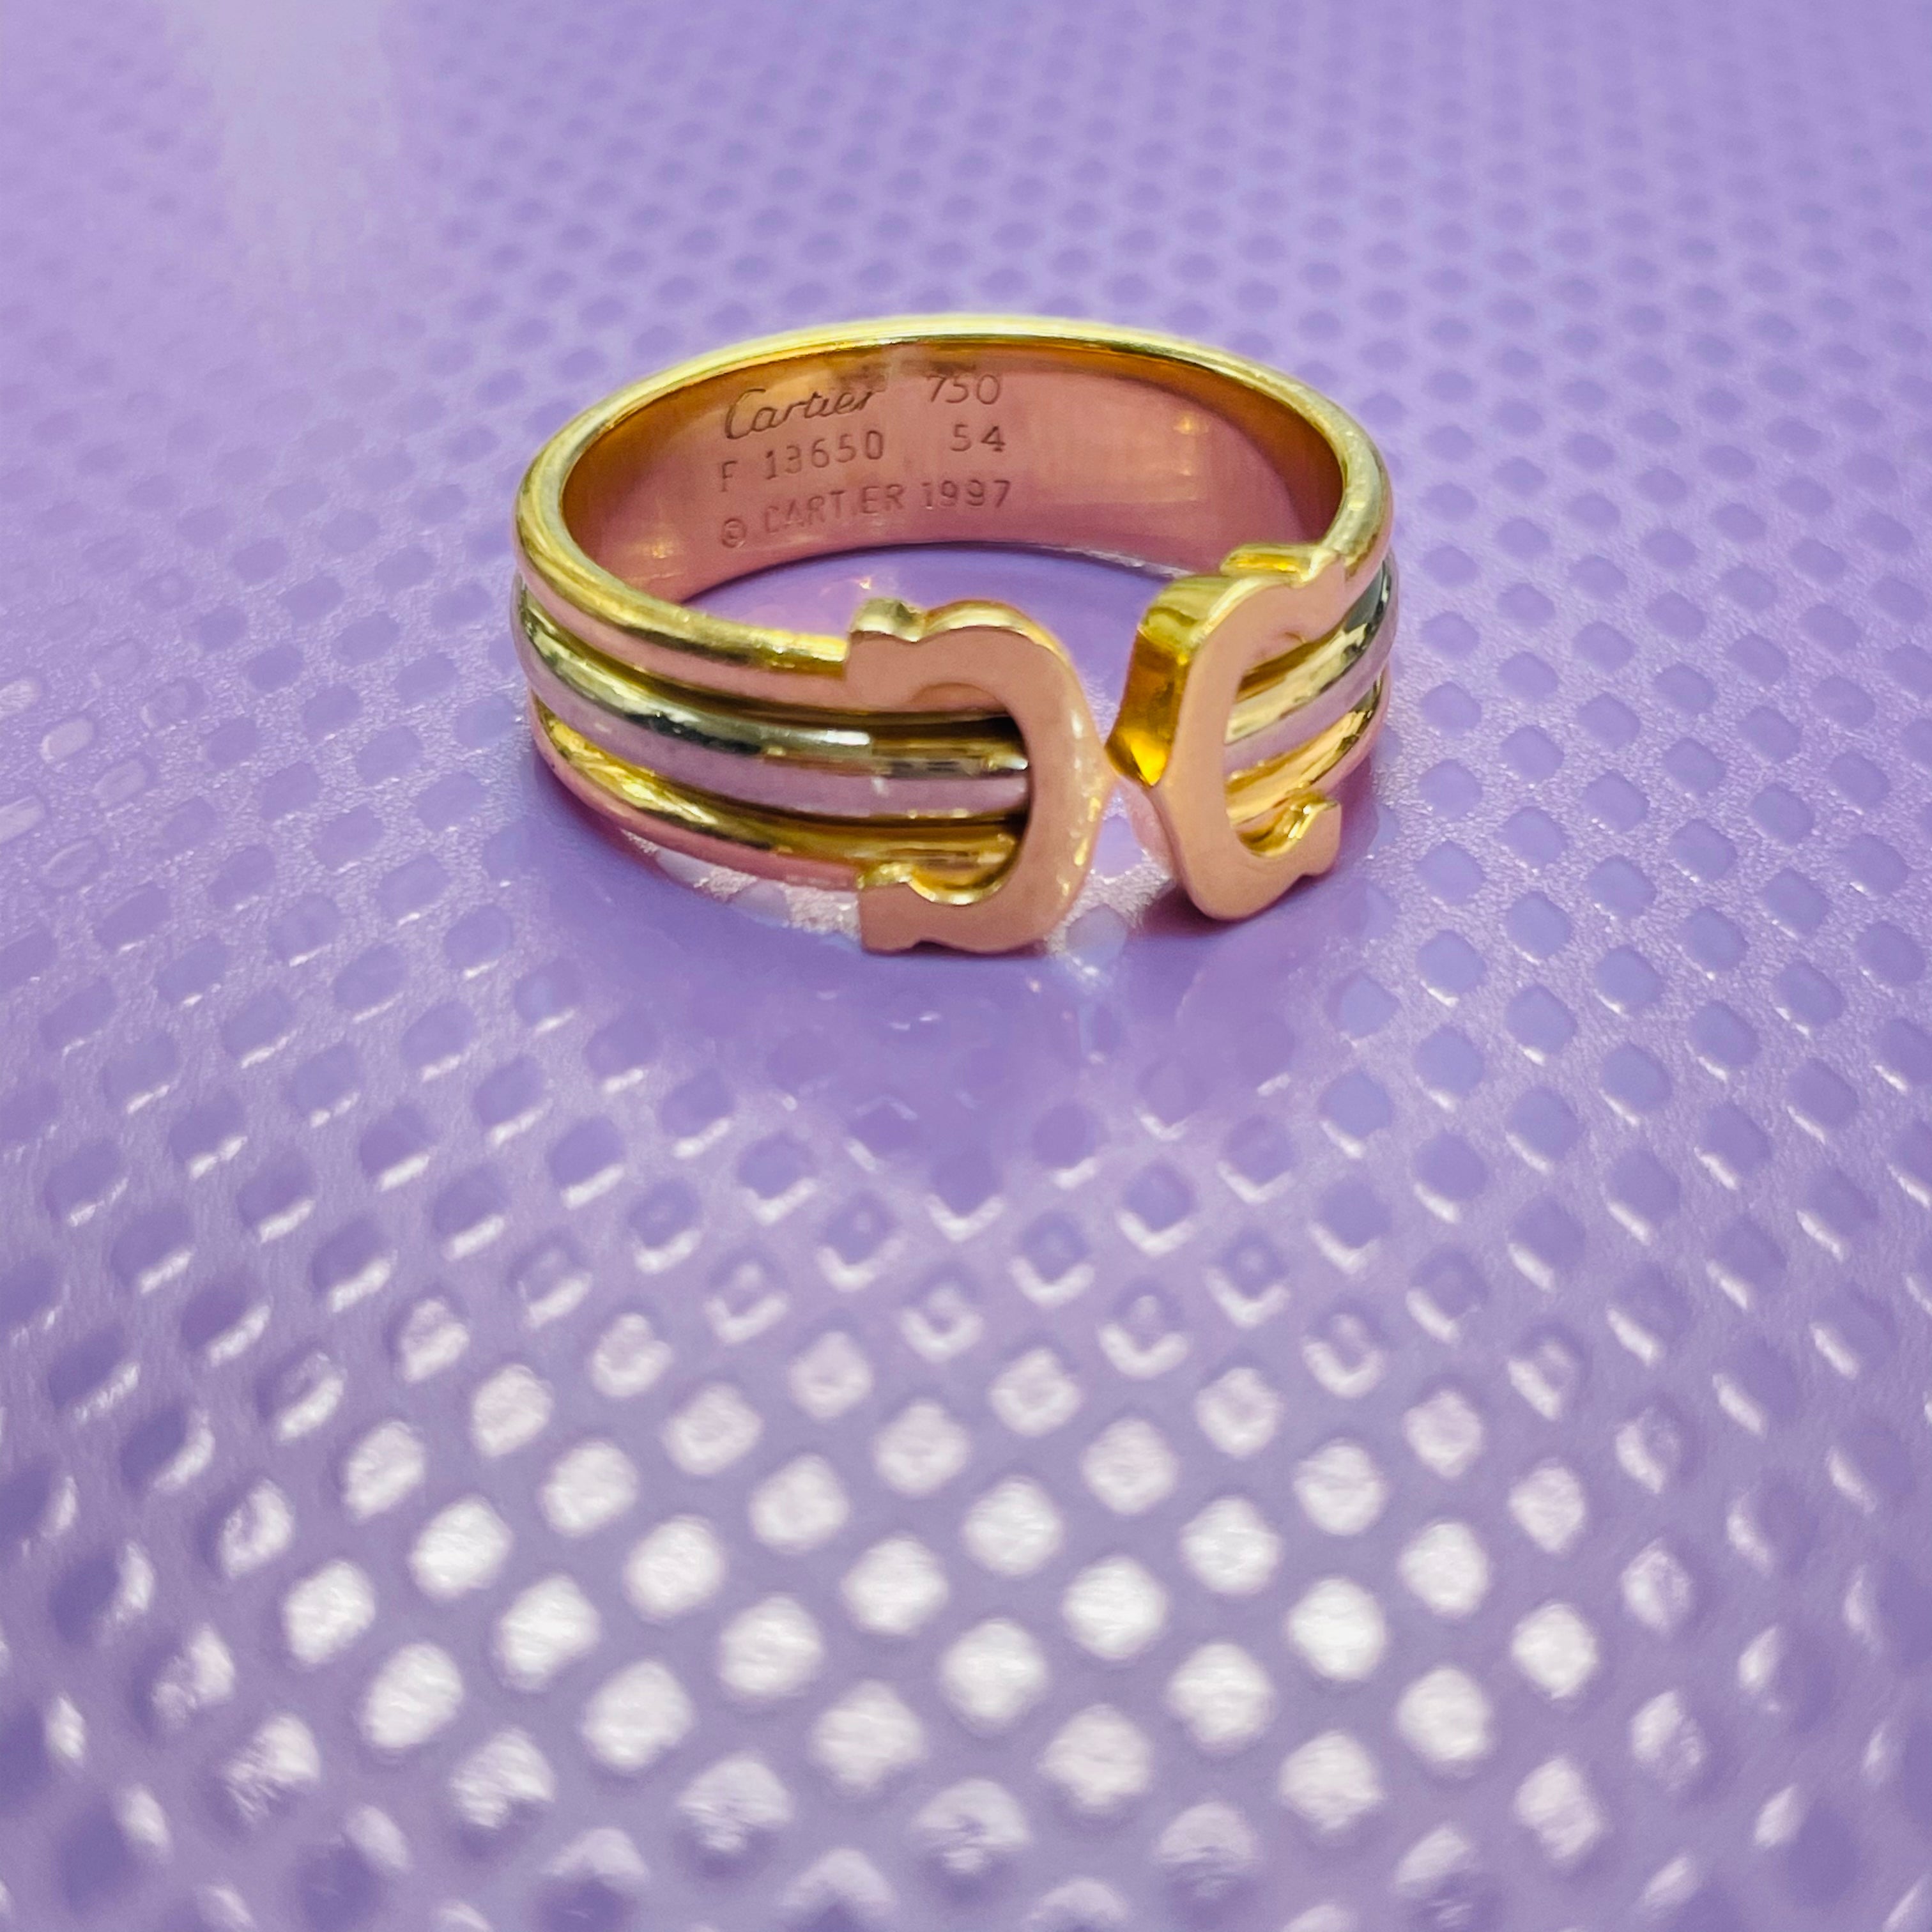 Solid 18K TRITONE Open Cartier ring size 6.5 and up adjustable